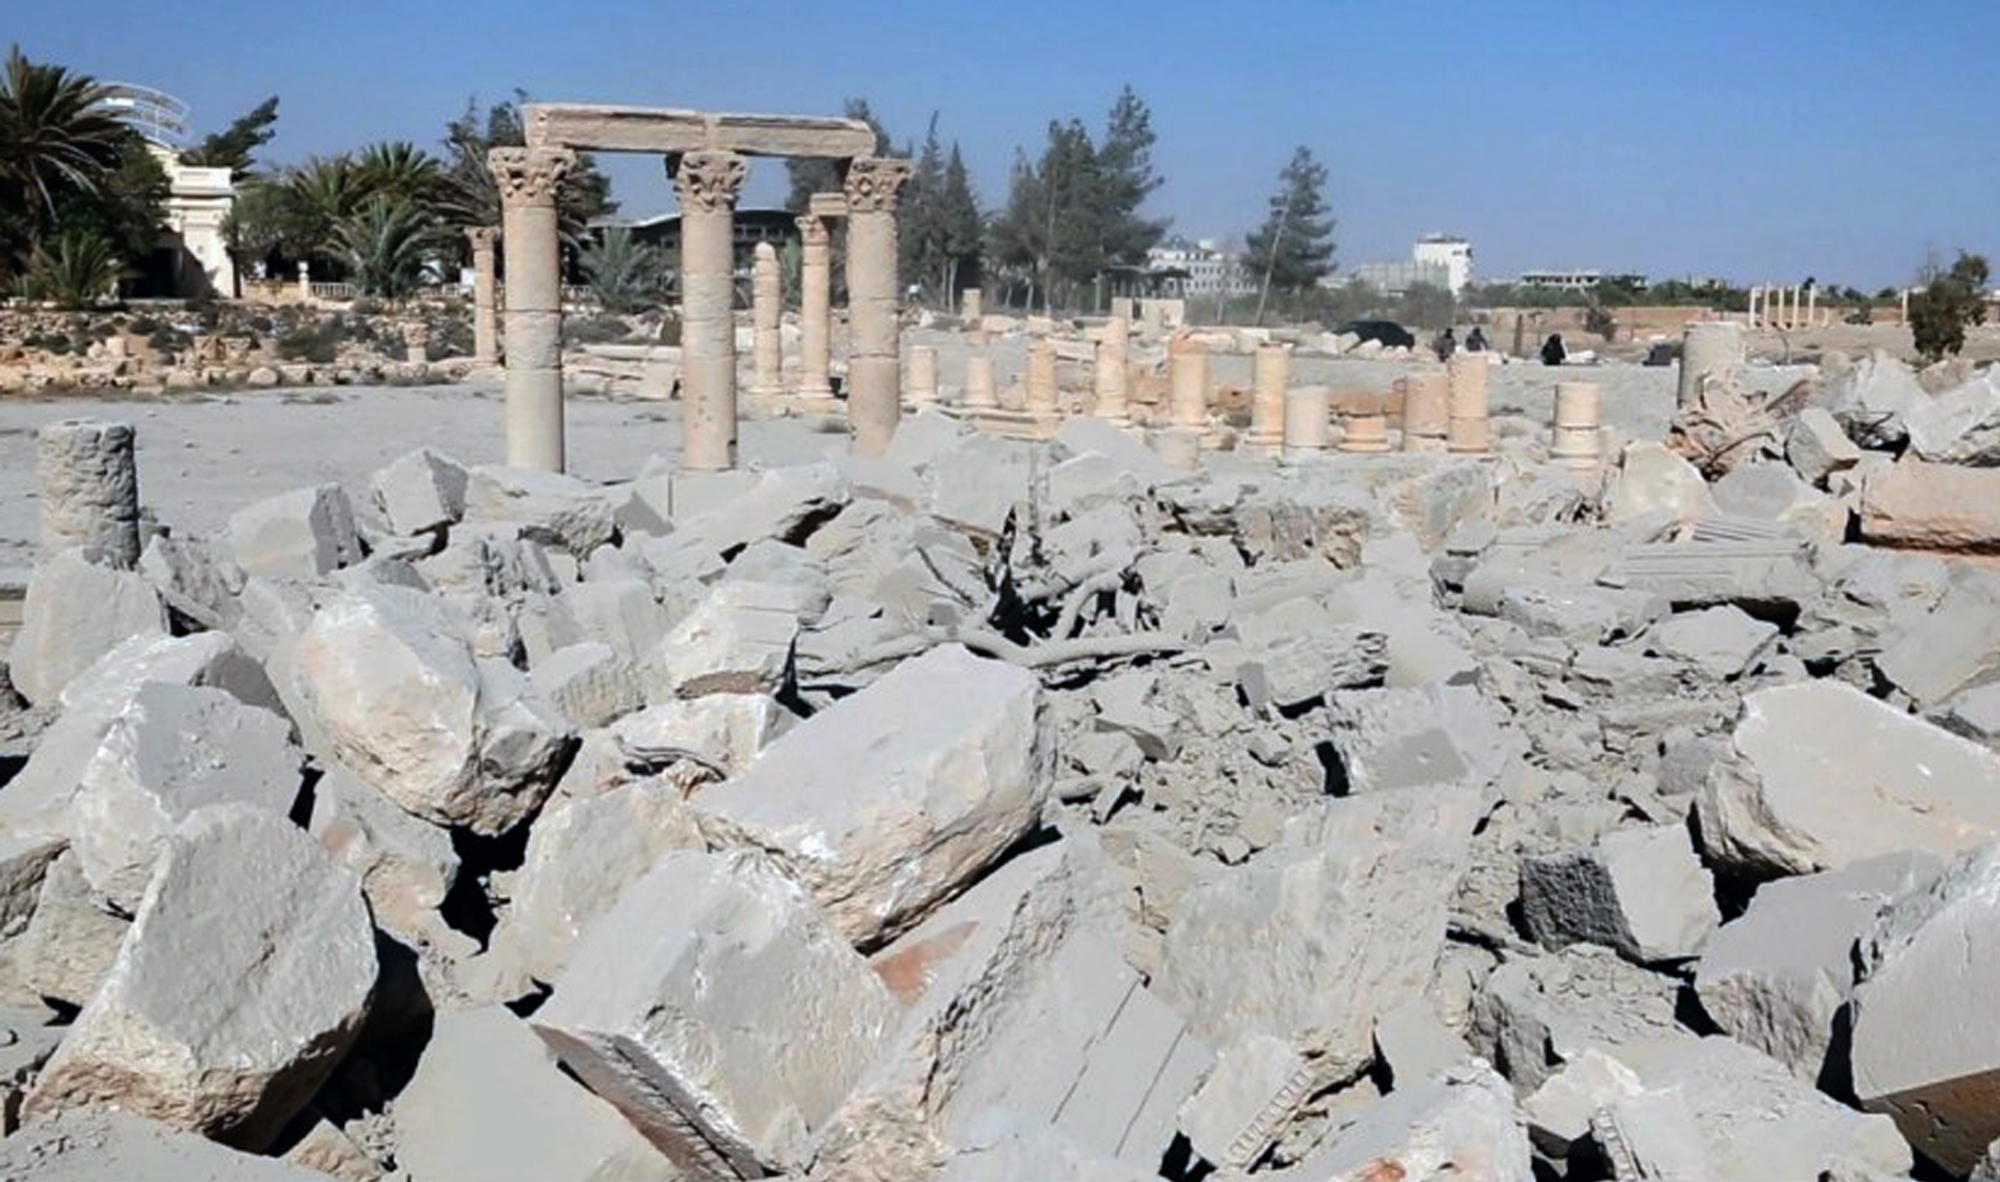 PHOTO: An undated photo released Aug. 25, 2015 on a social media site used by Islamic State militants purports to show the demolished 2,000-year-old temple of Baalshamin in Syria's ancient caravan city of Palmyra.